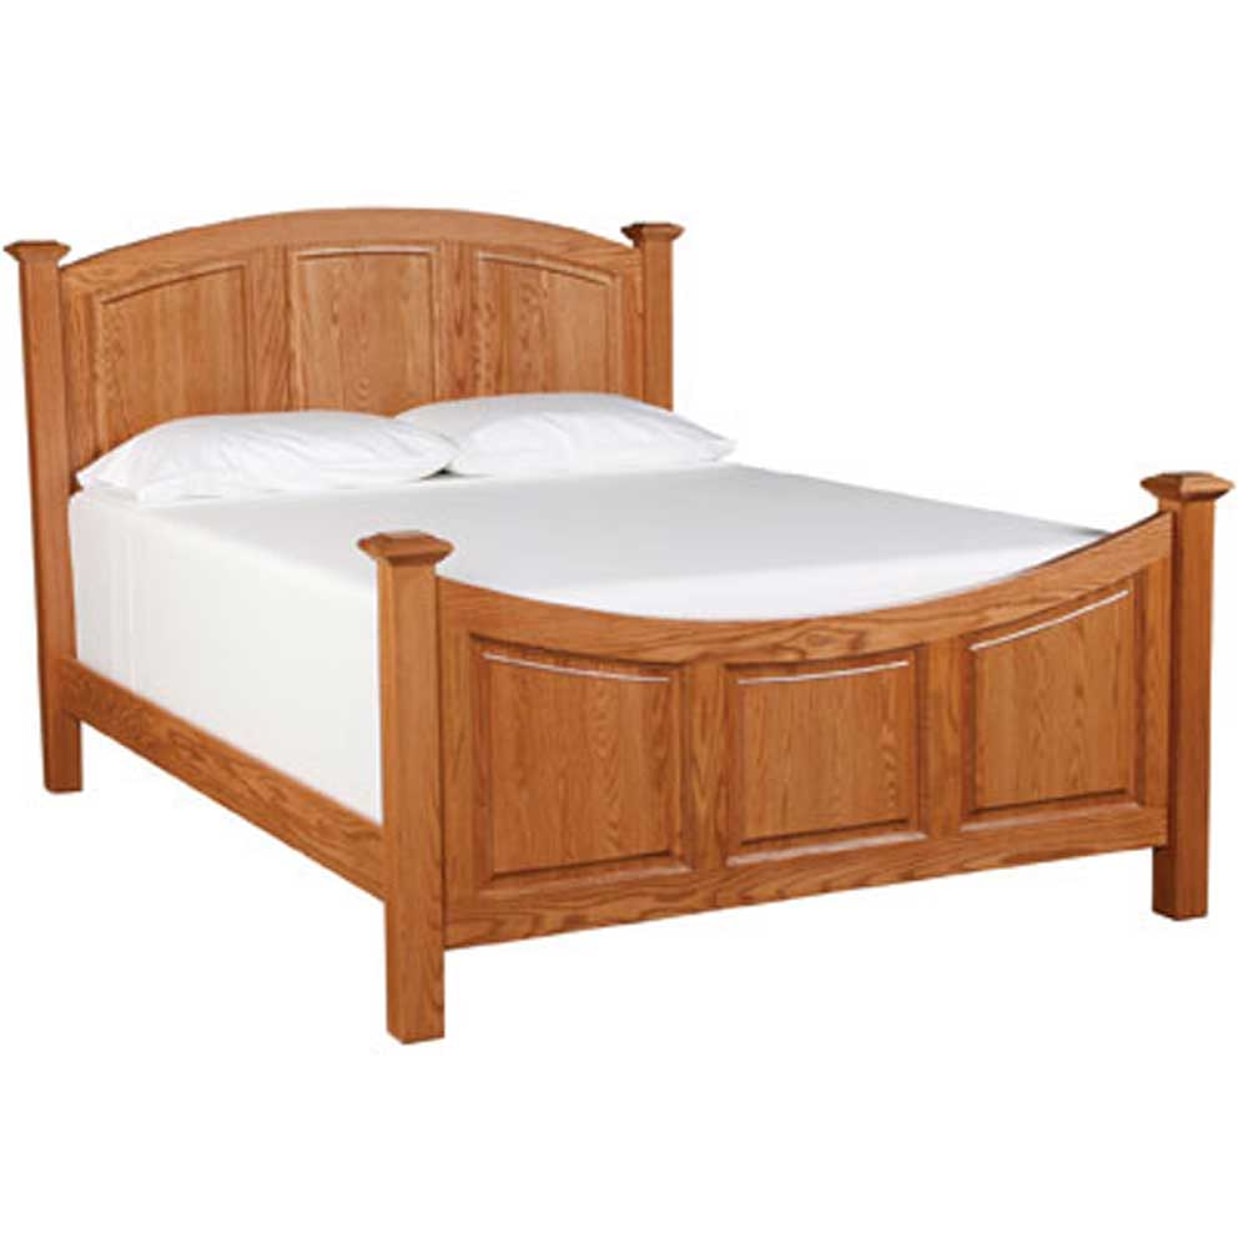 Simply Amish Homestead Amish Queen Lexington Bed